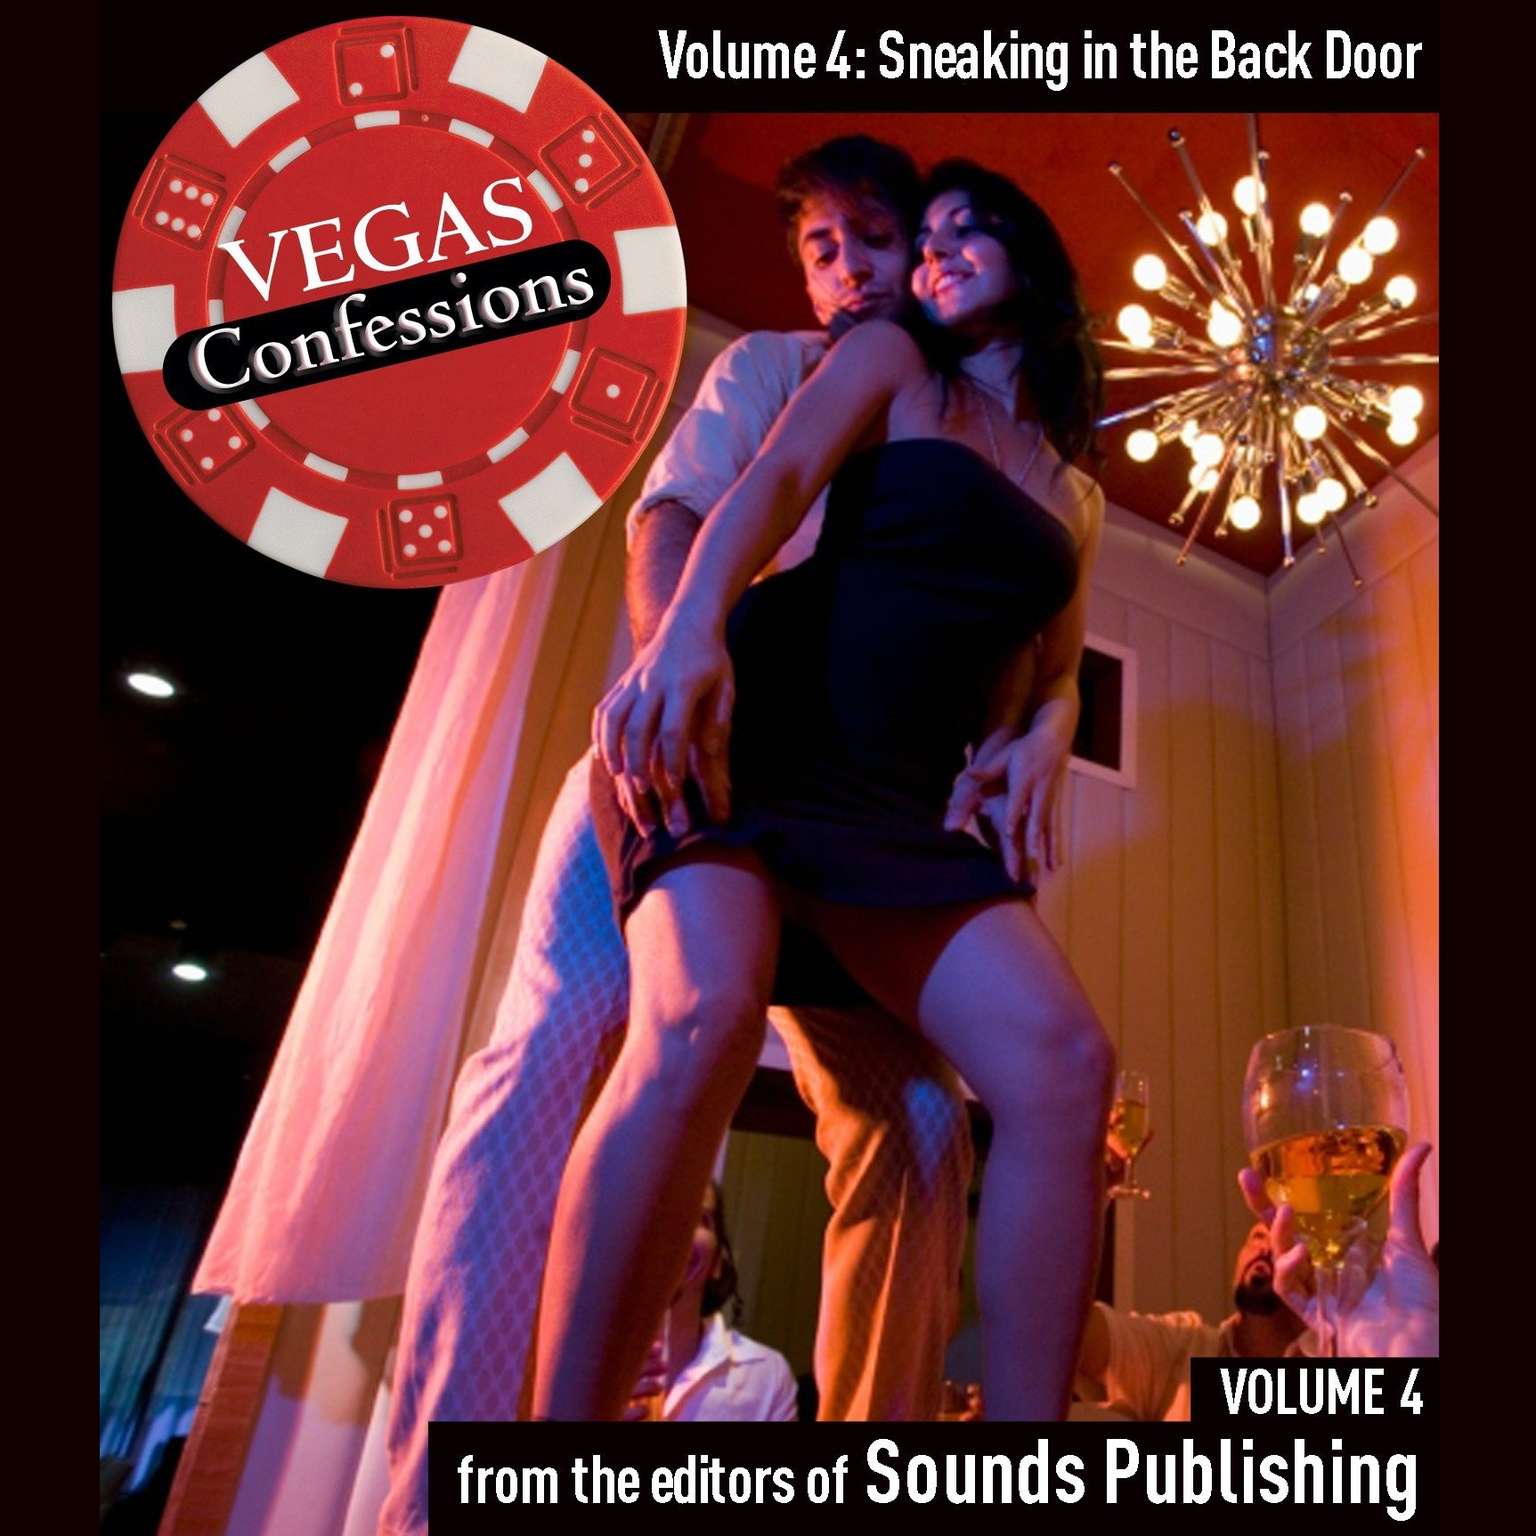 Vegas Confessions 4: Sneaking in the Back Door Audiobook, by The Editors of Sounds Publishing